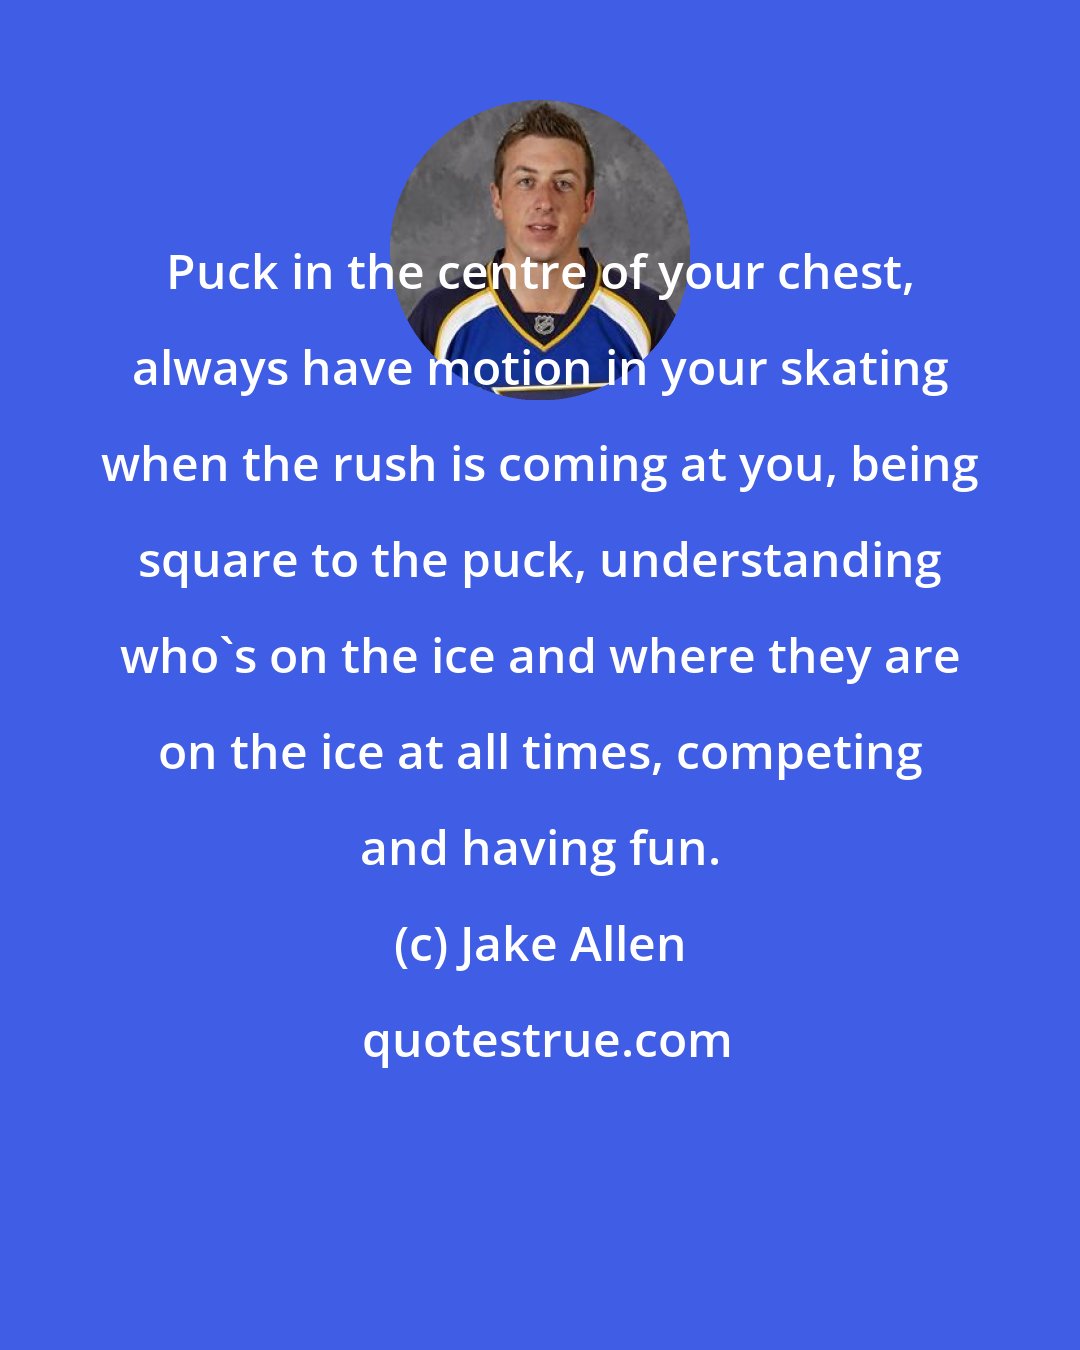 Jake Allen: Puck in the centre of your chest, always have motion in your skating when the rush is coming at you, being square to the puck, understanding who's on the ice and where they are on the ice at all times, competing and having fun.